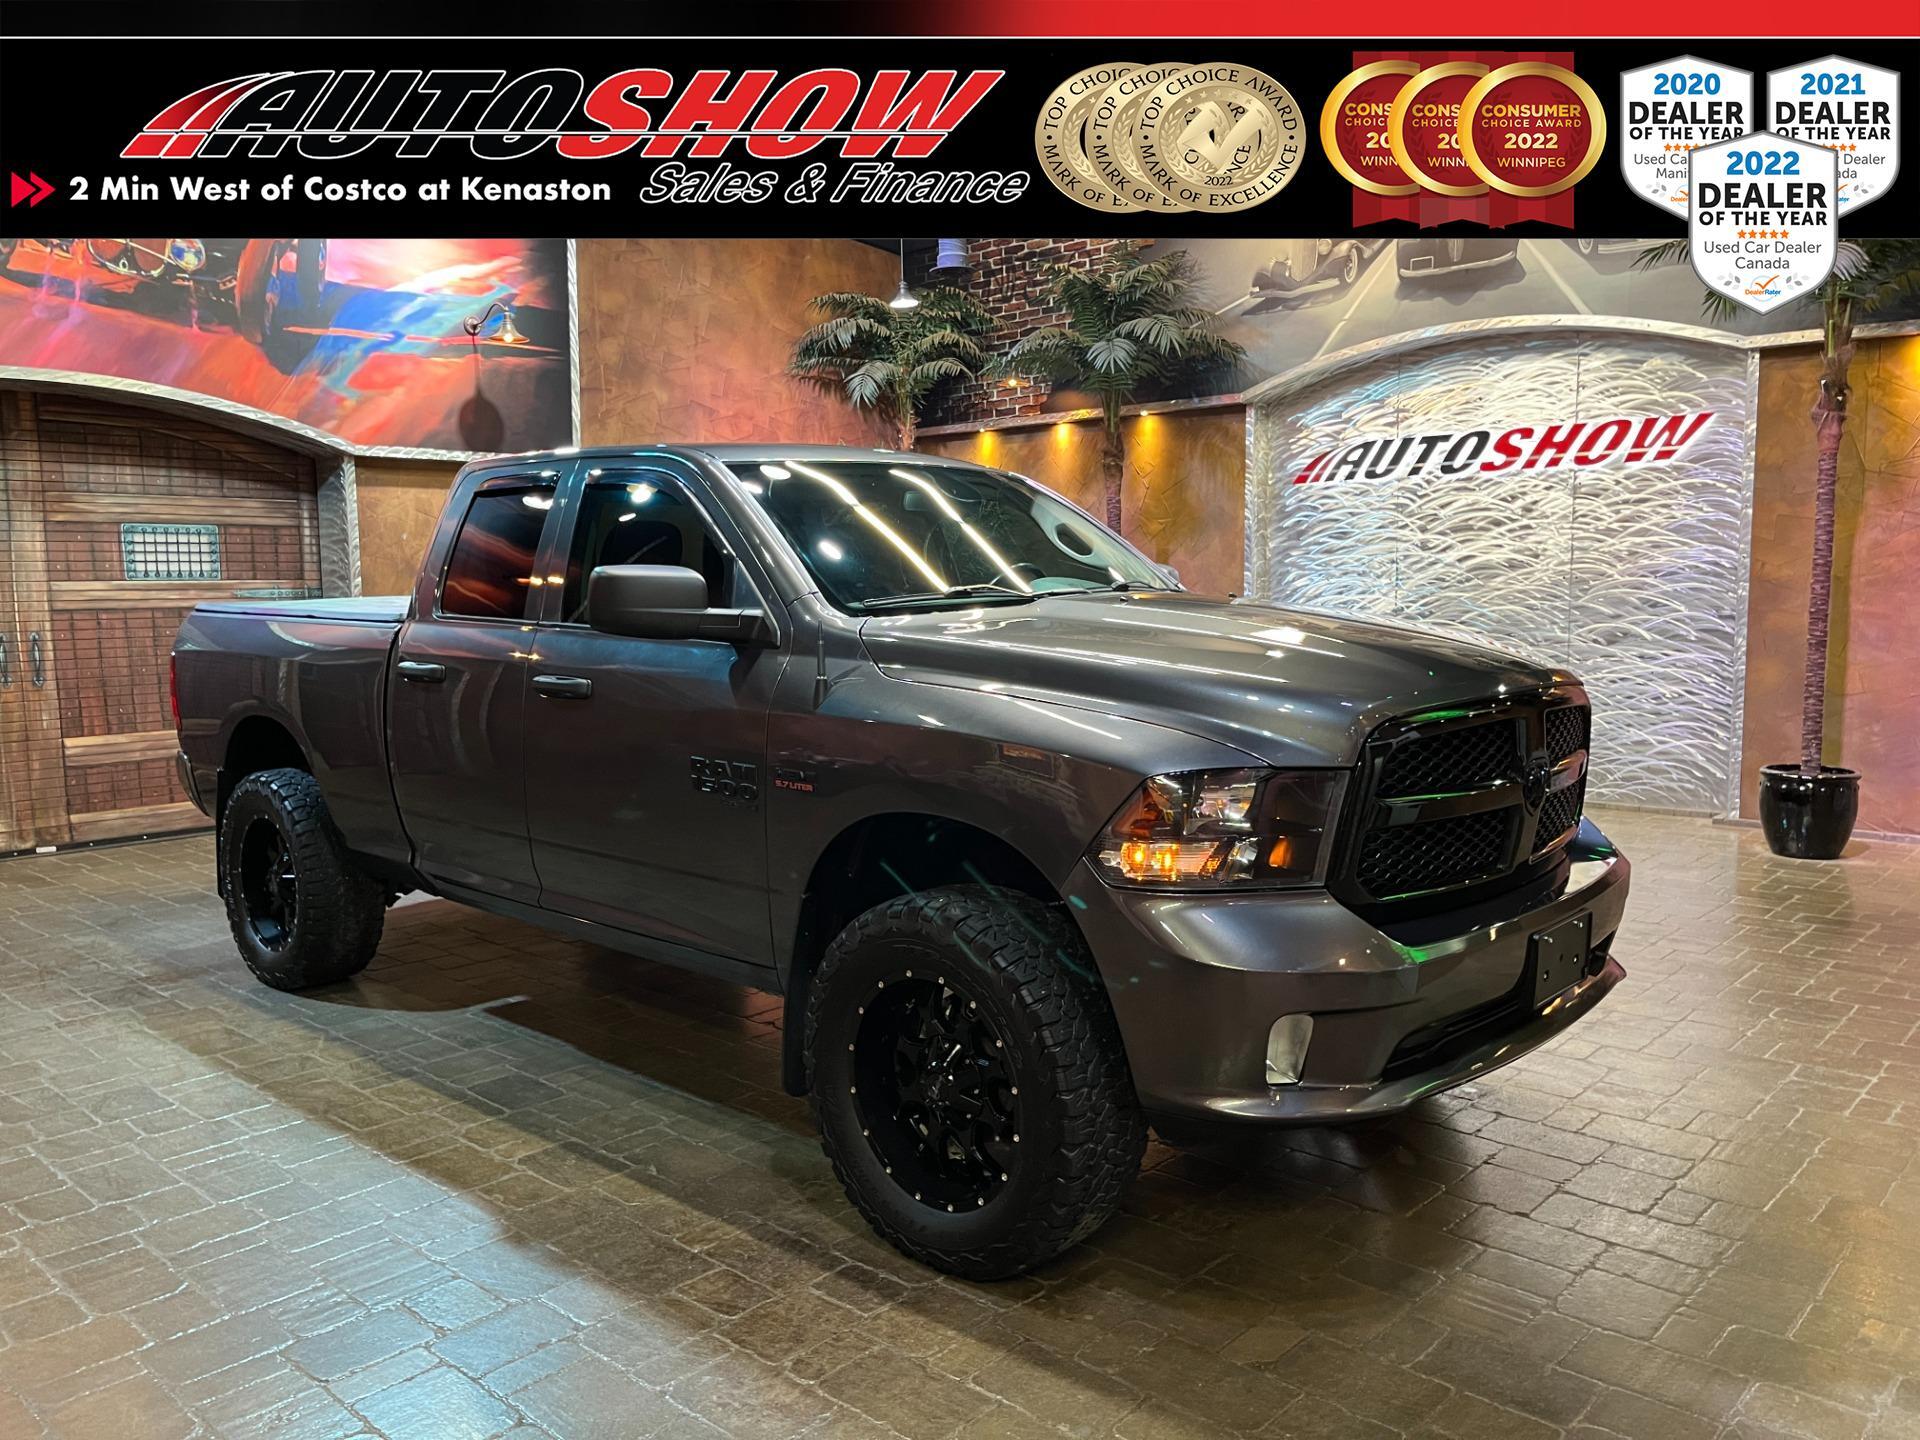 2021 Dodge Ram 1500 Lifted Night Edition - 35in KO2s, Htd Seats & Whee